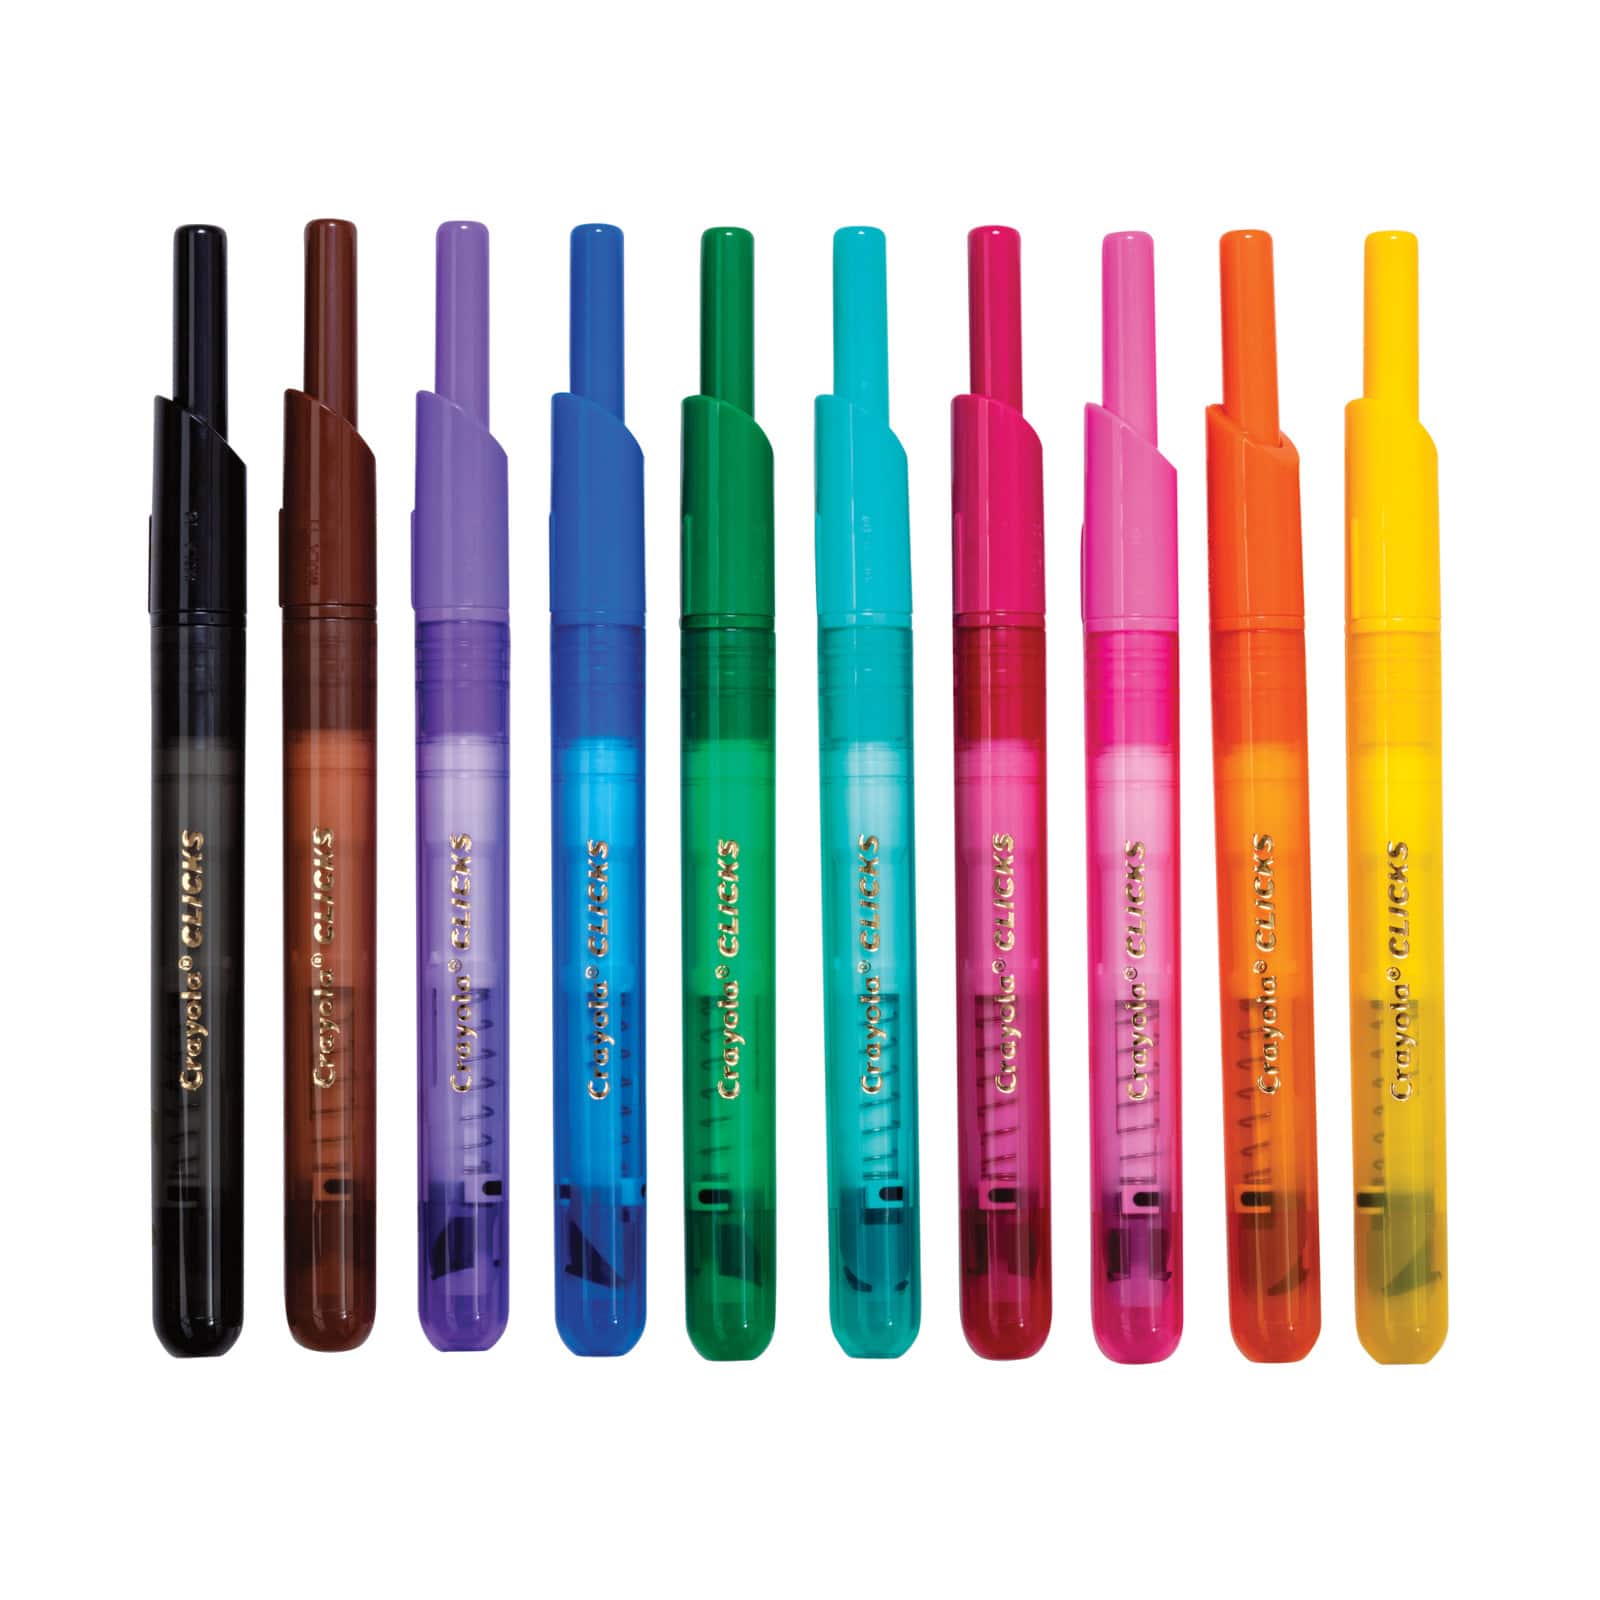 8 Packs: 10 ct. (80 total) Crayola® Clicks Retractable Markers